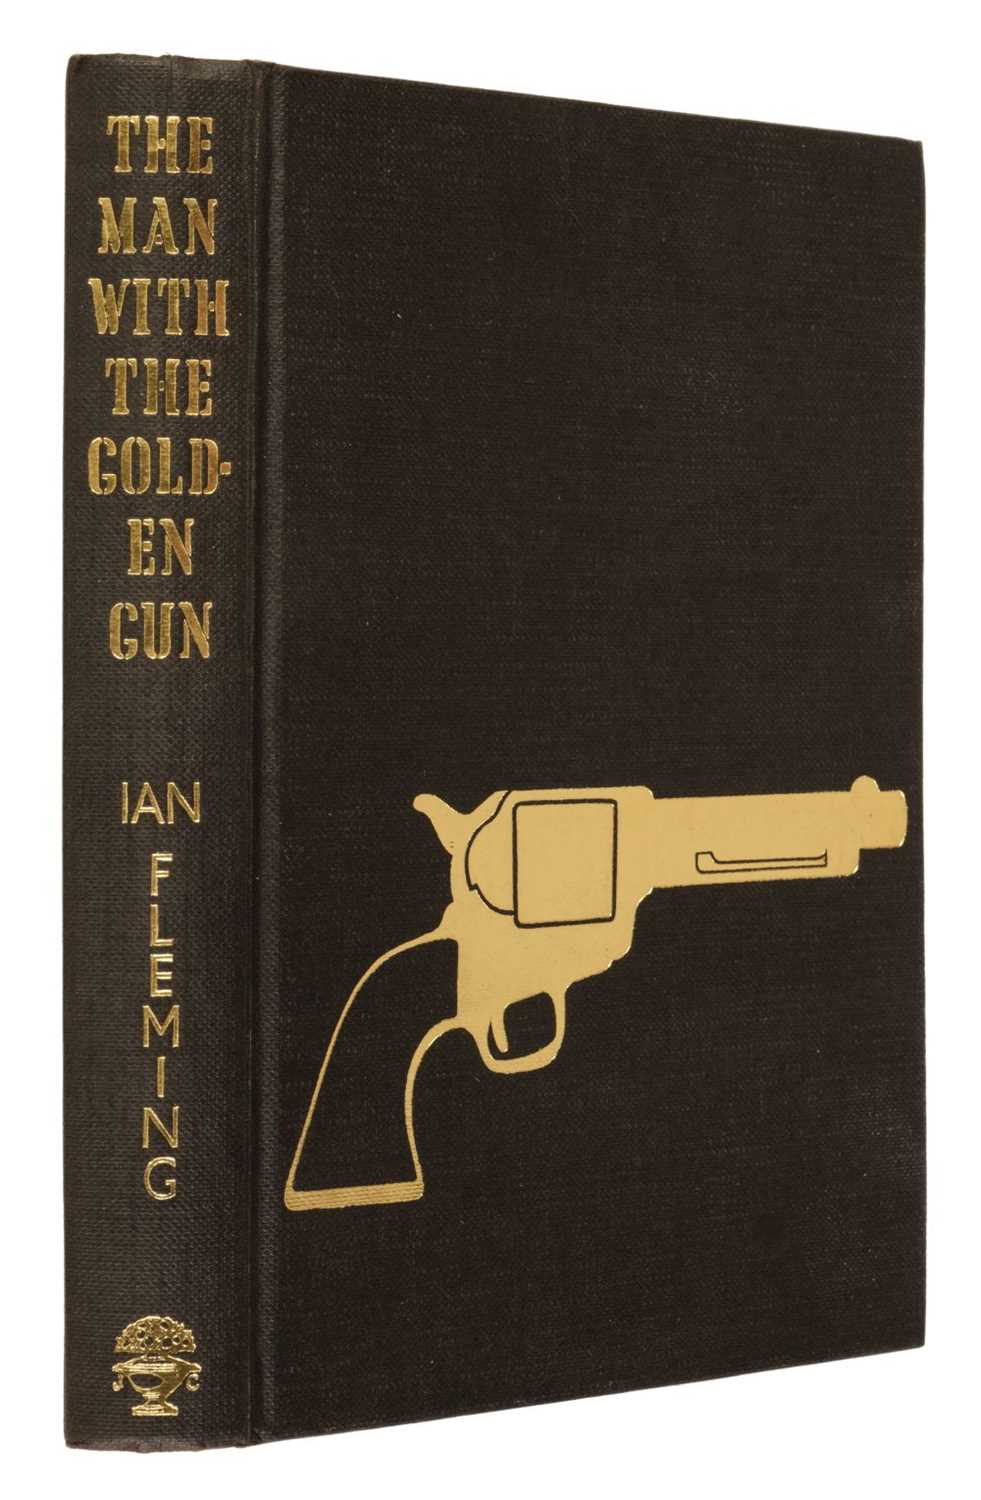 Lot 829 - Fleming (Ian). The Man With the Golden Gun, 1st edition, 1st issue, 1965